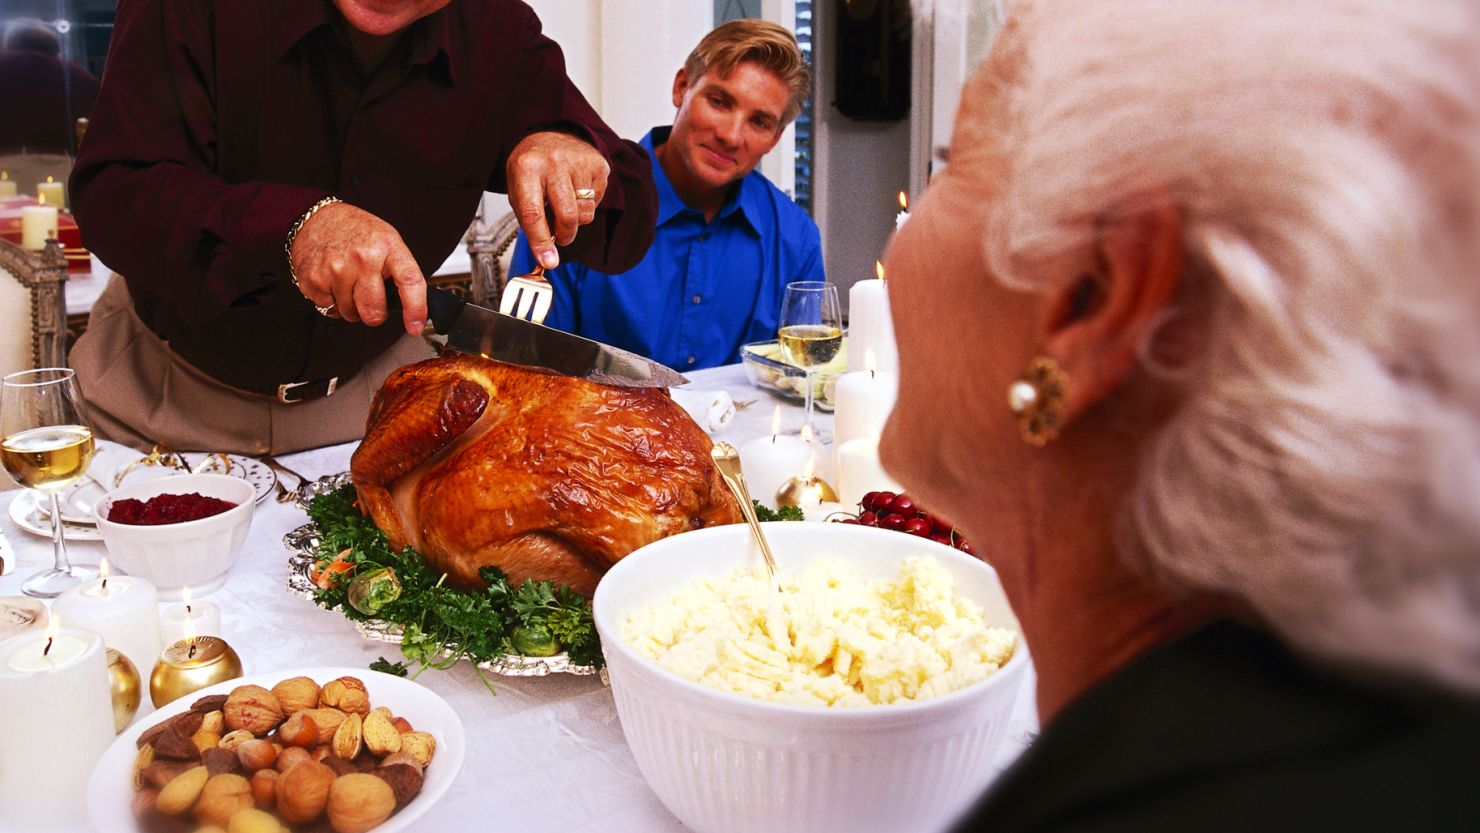 A family member with dementia will have a better Thanksgiving experience in a small-group setting, says expert Laura Wayman.